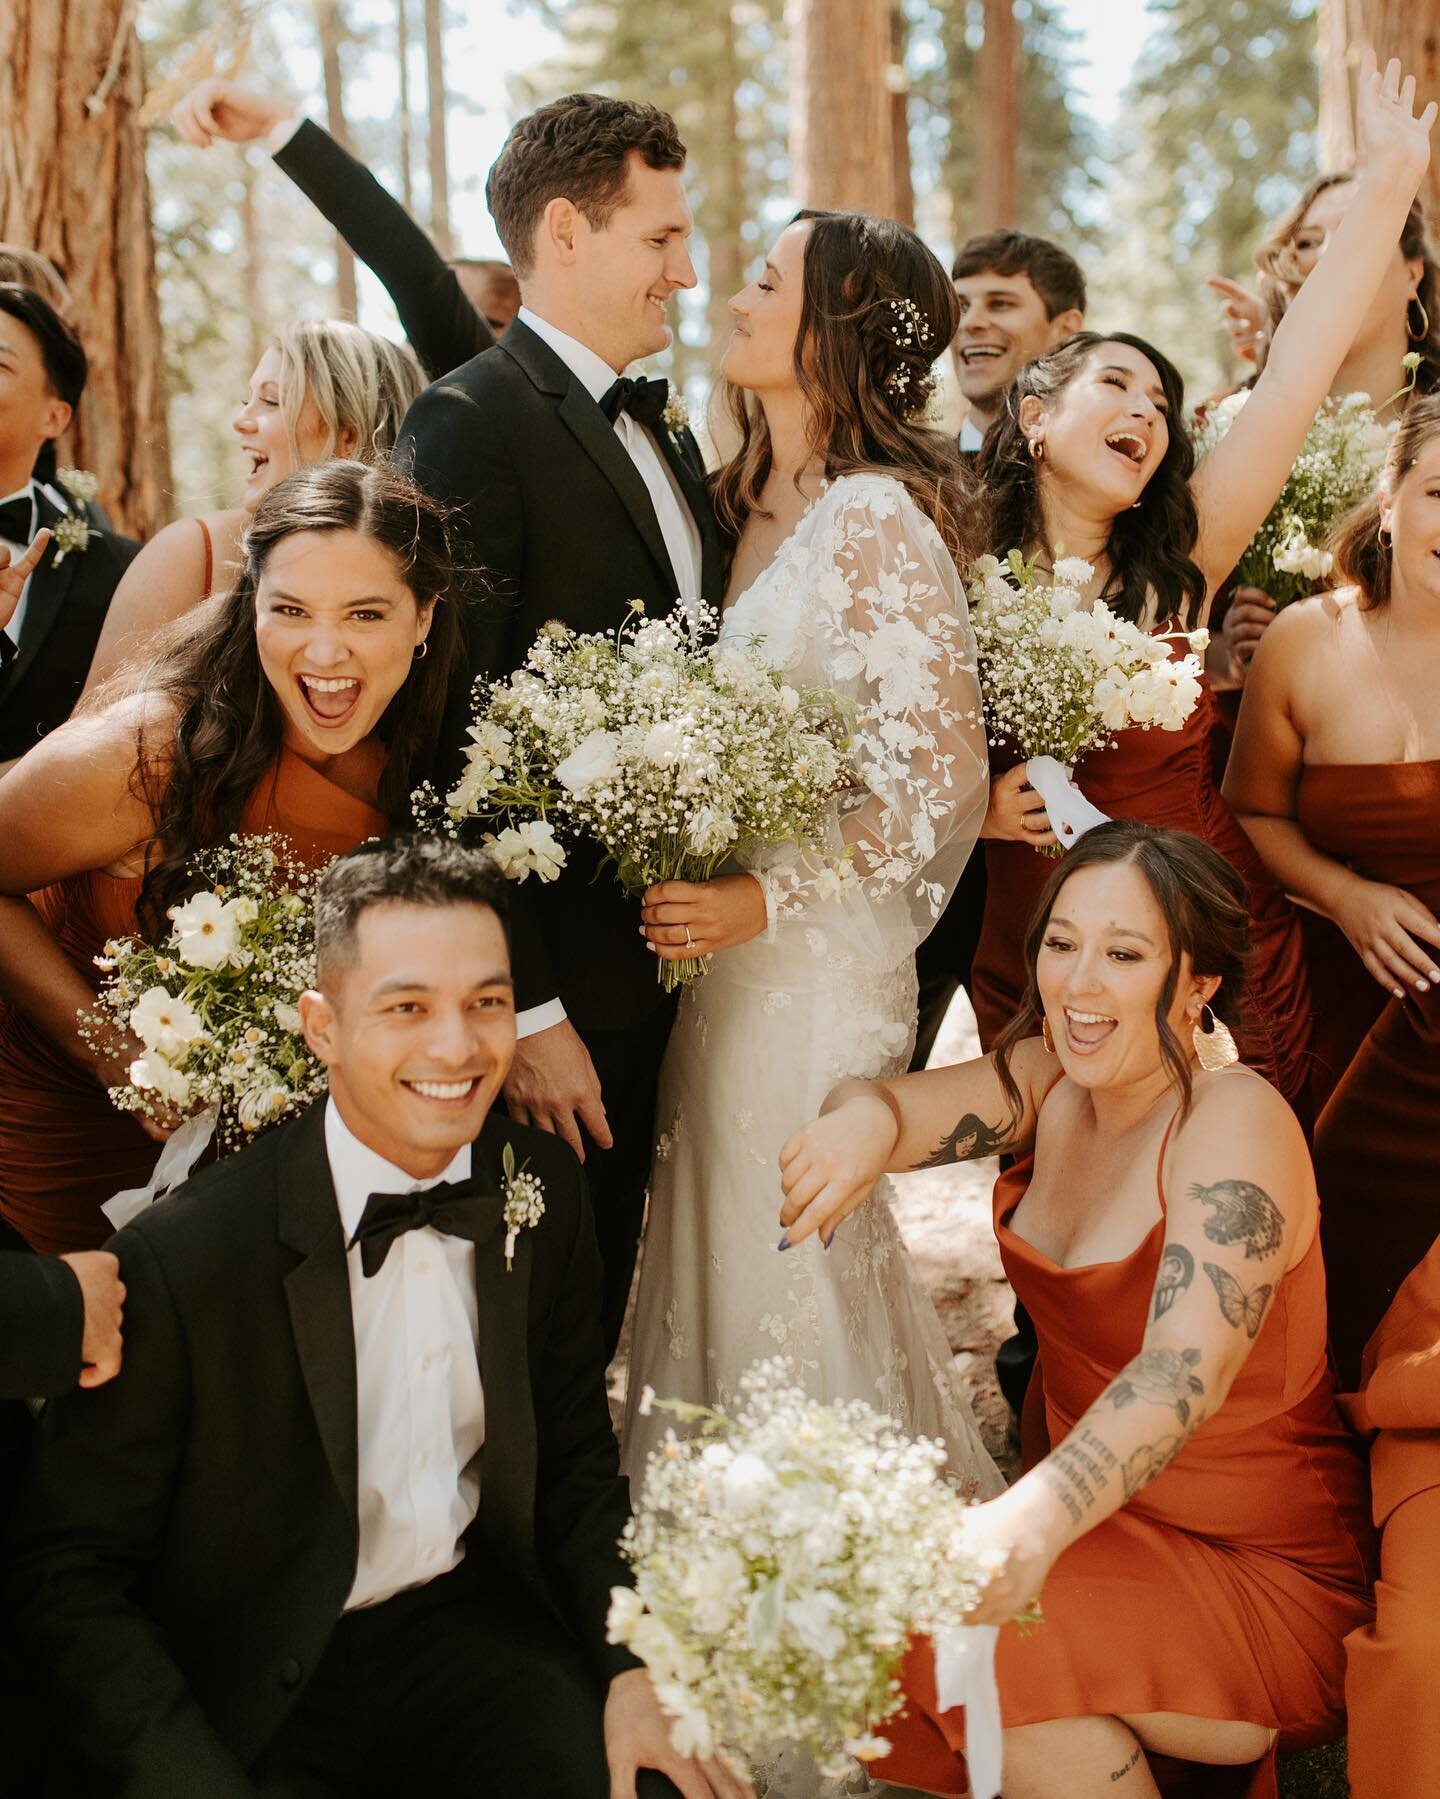 Wedding parties can be one of the best and most memorable parts of a wedding! This wedding party was truly epic! 🤍

Did you know that Ancient Romans were incredibly superstitious? Wedding parties consisted of 10 maids and 10 men who protected the br